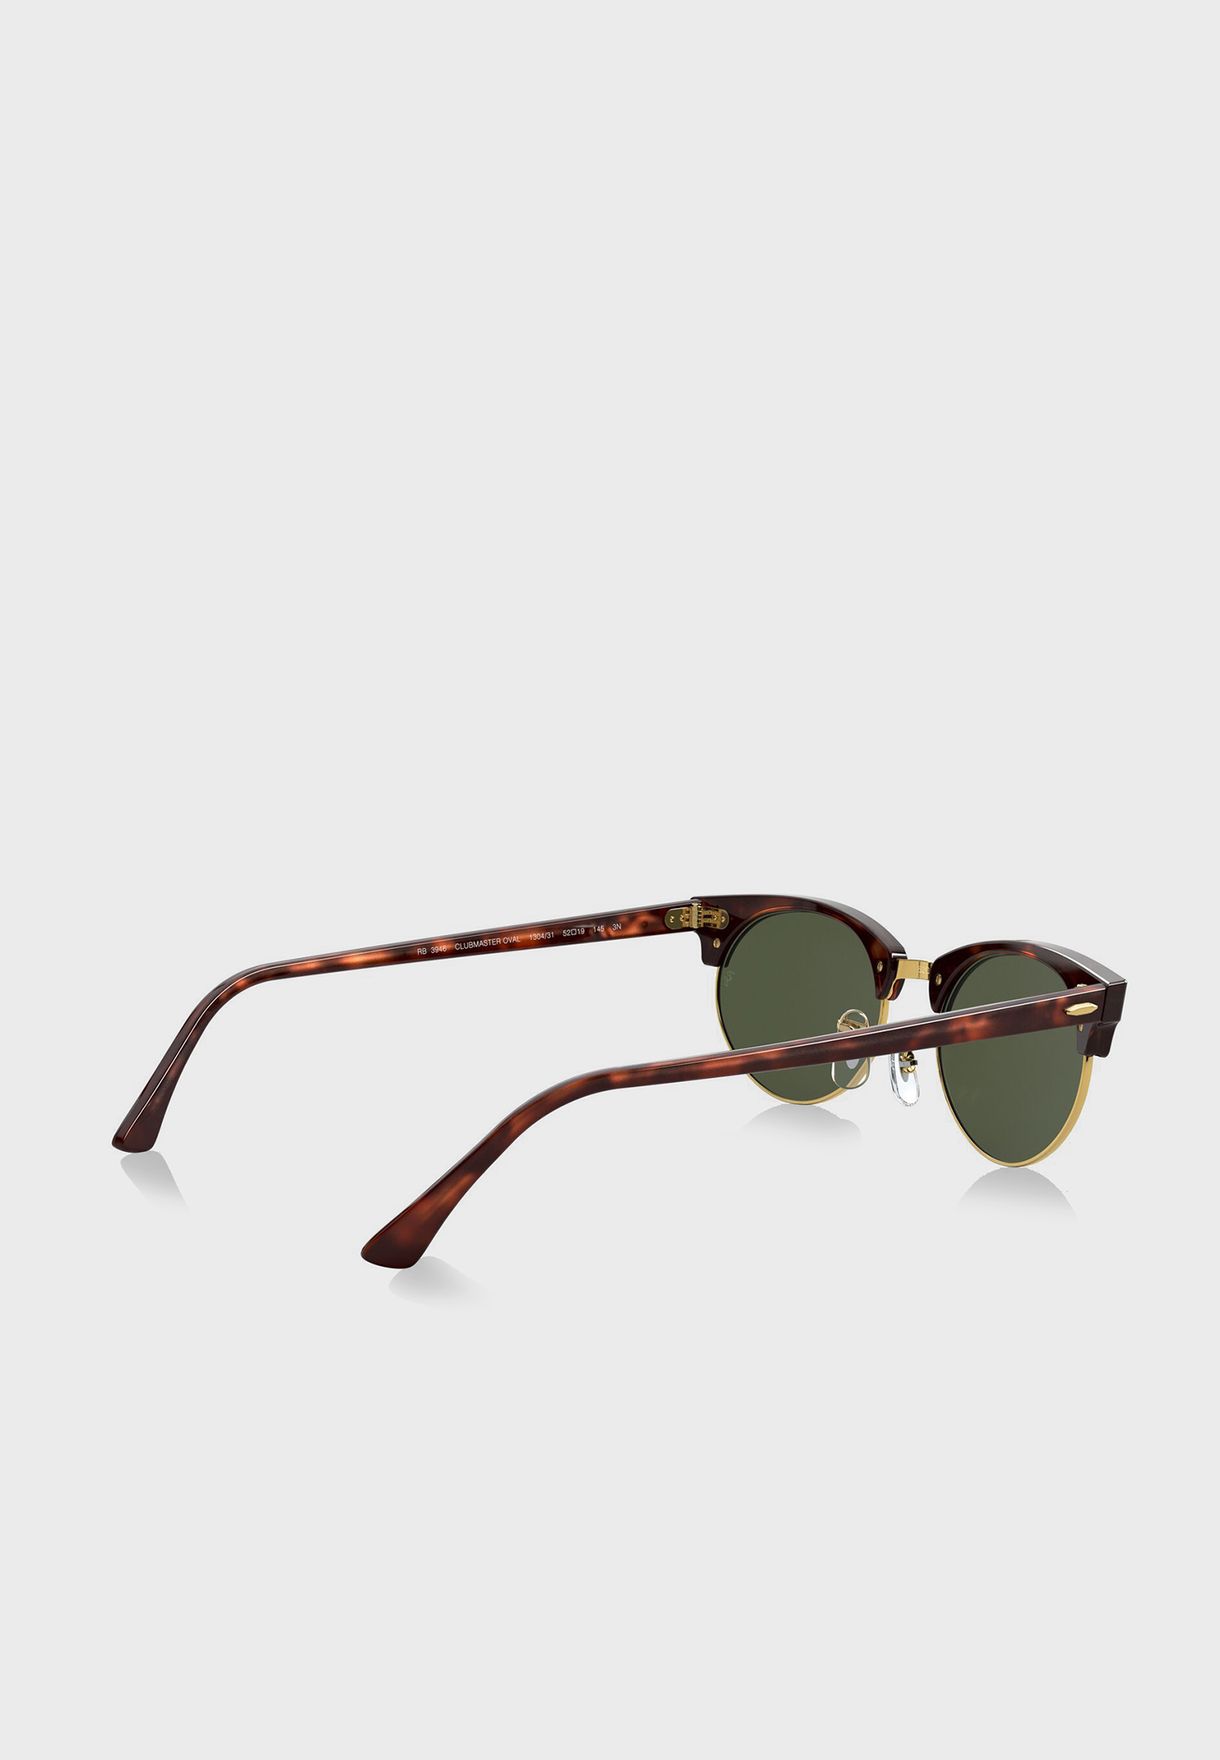 0Rb3946 Clubmaster Sunglasses